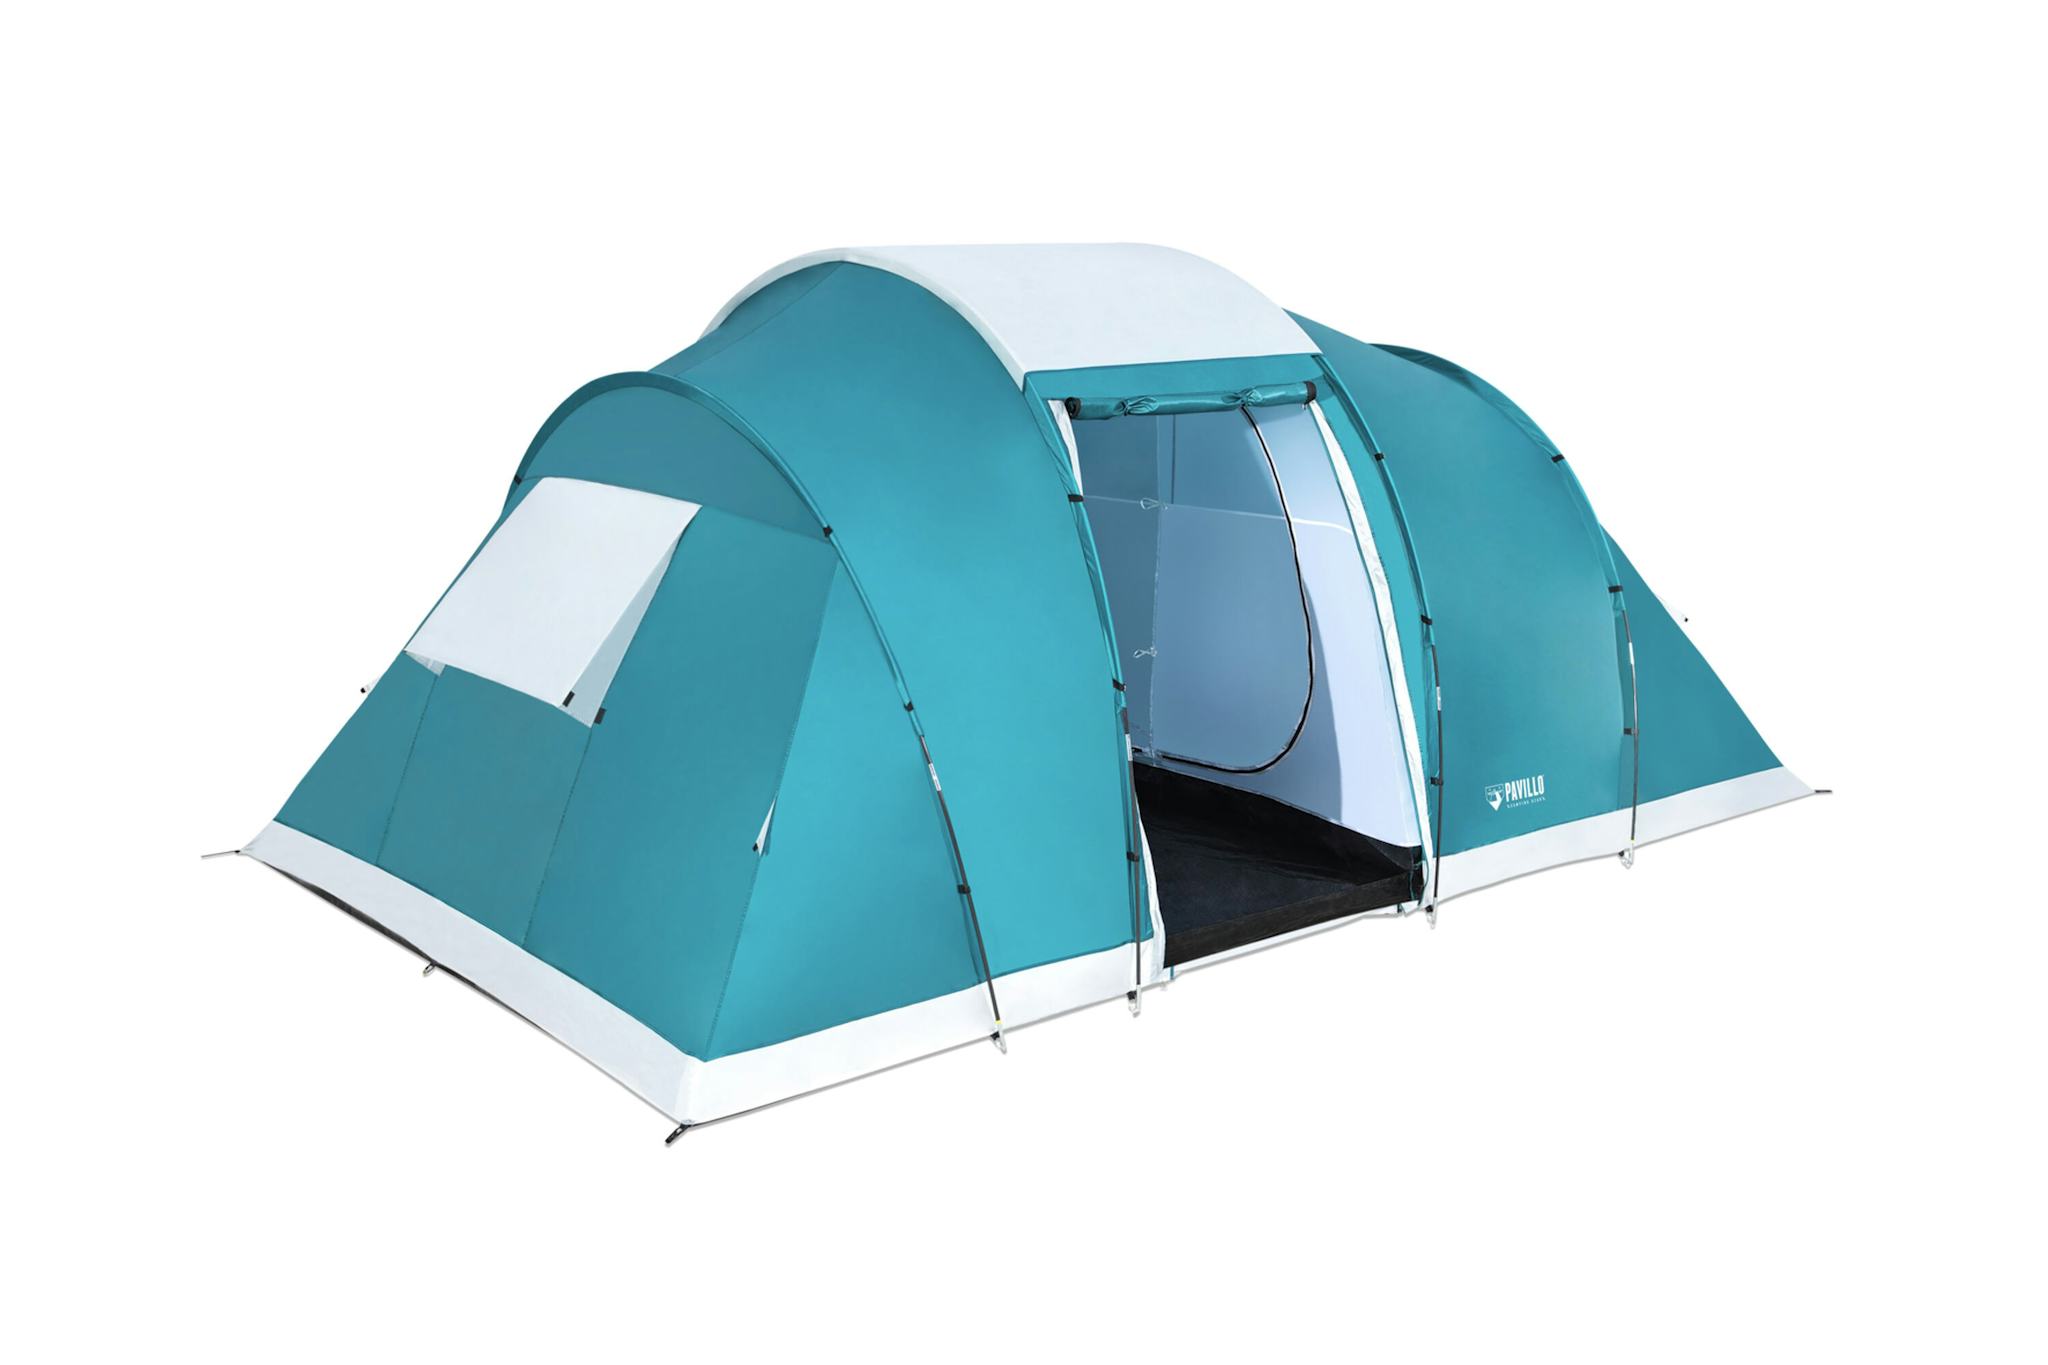 Camping Tente de camping 6 places Family Ground 6 Bestway™ 490 x 280 x 200 cm Bestway 2